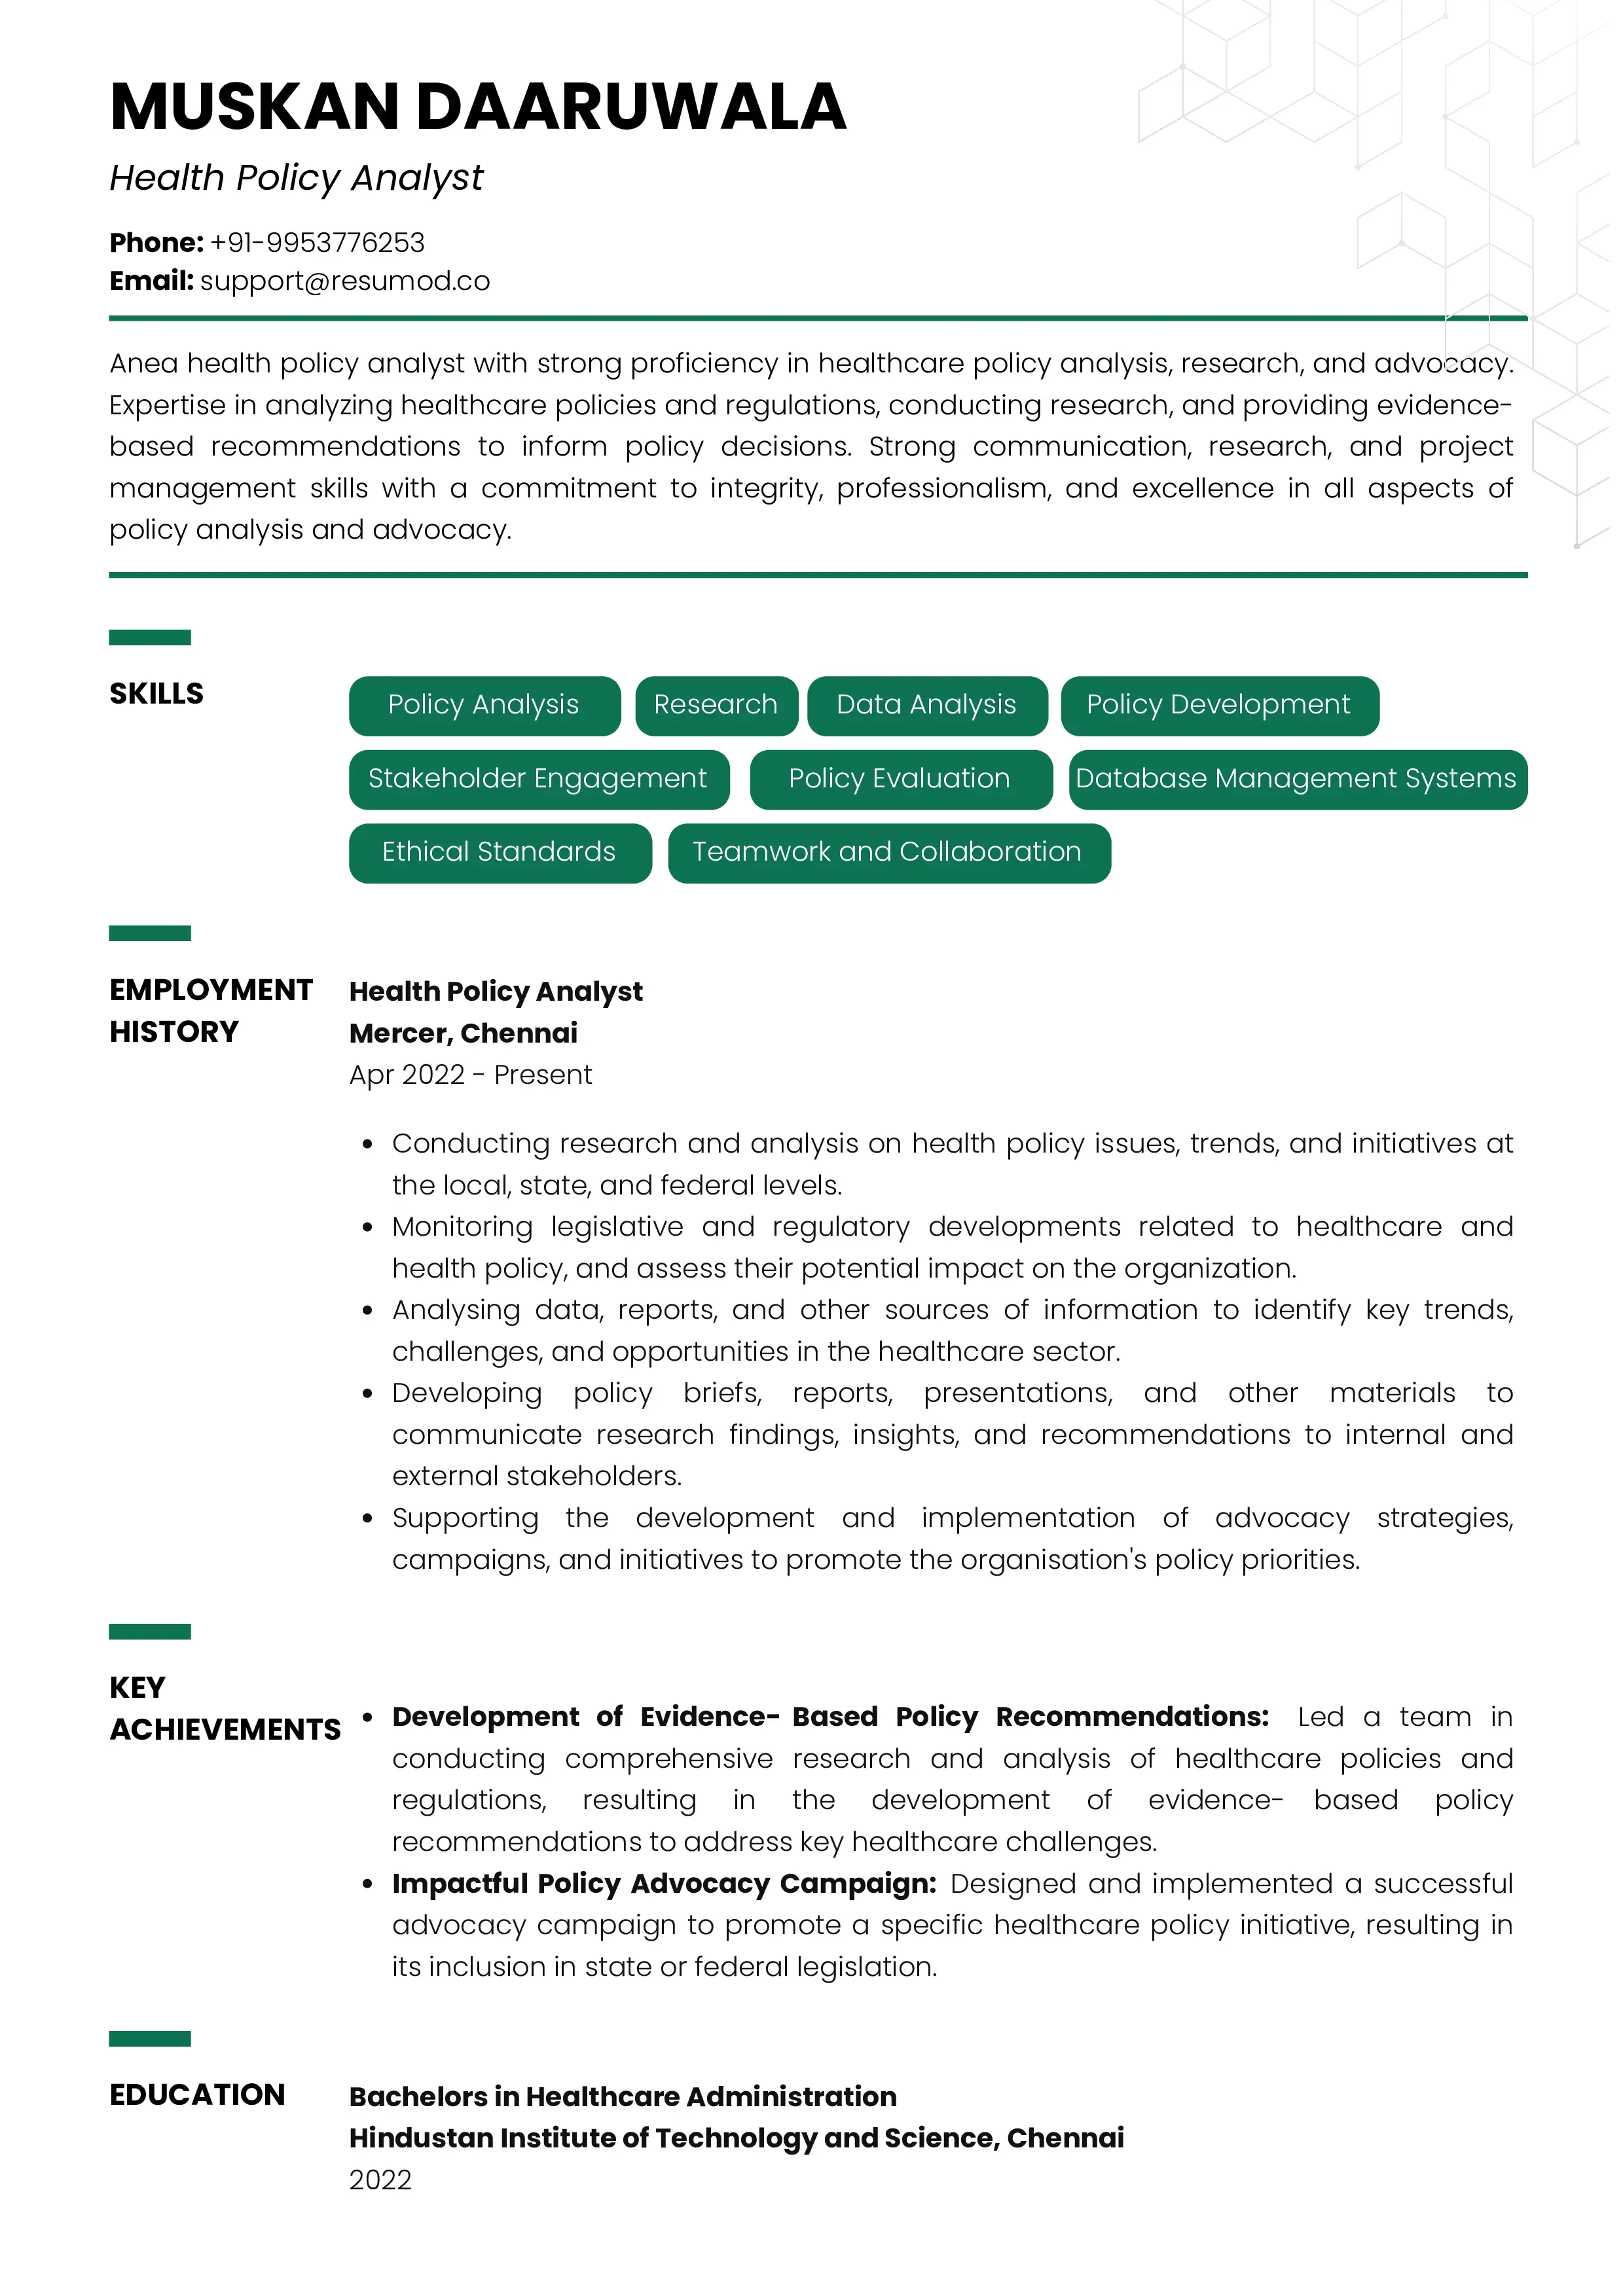 Sample Resume of Healthcare Policy Analyst | Free Resume Templates & Samples on Resumod.co